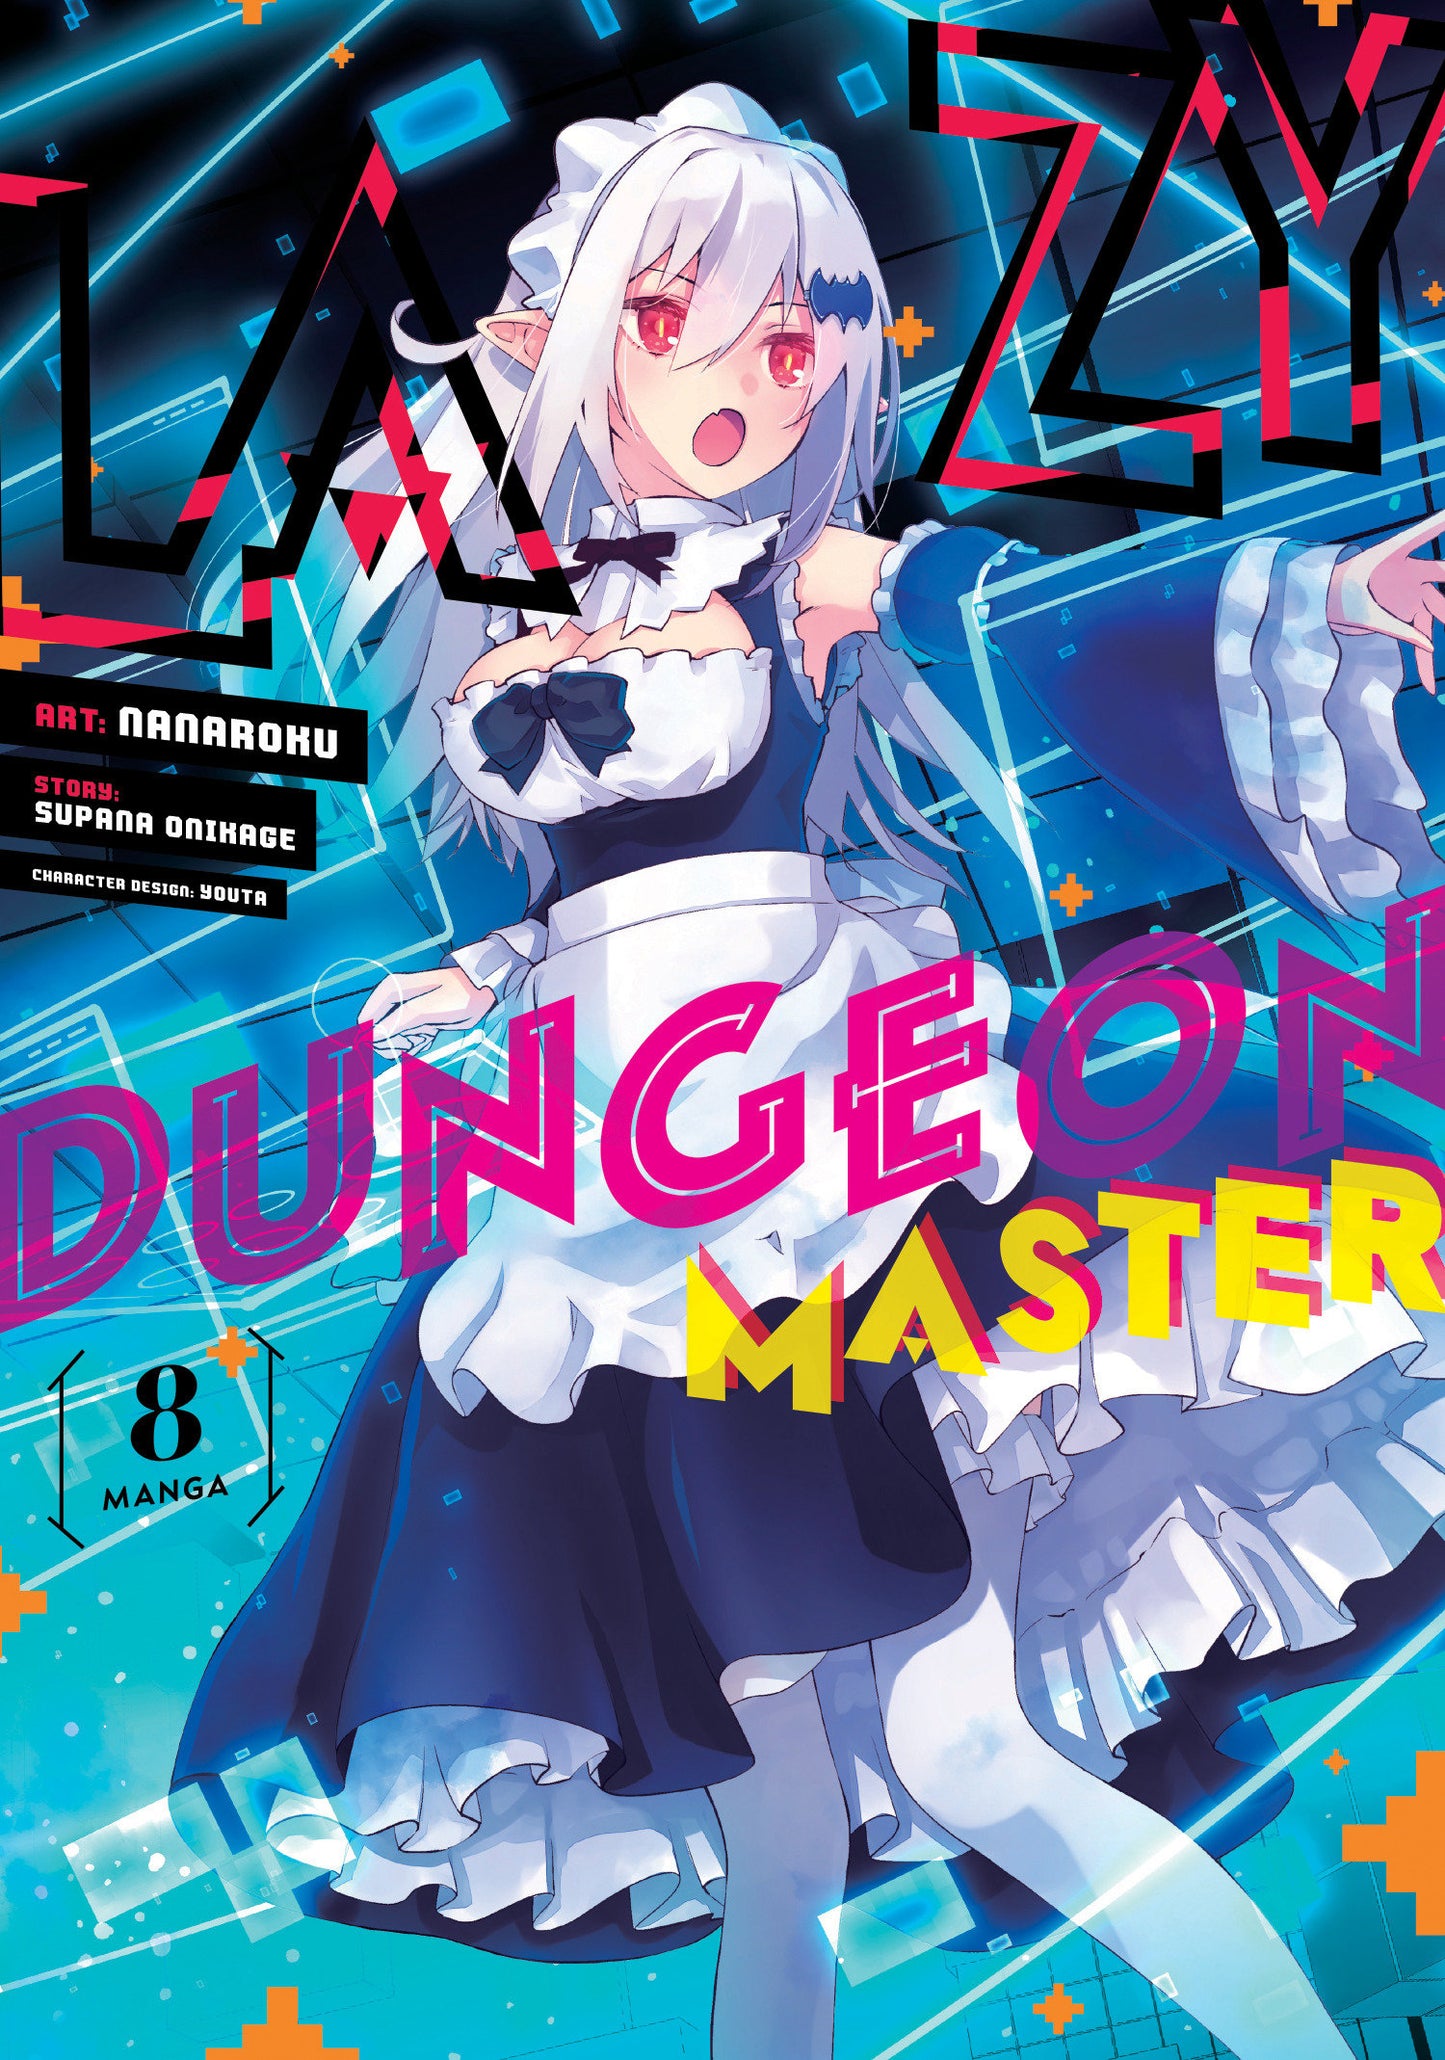 Lazy Dungeon Master (Manga) Vol. 8 - Release Date:  5/21/24